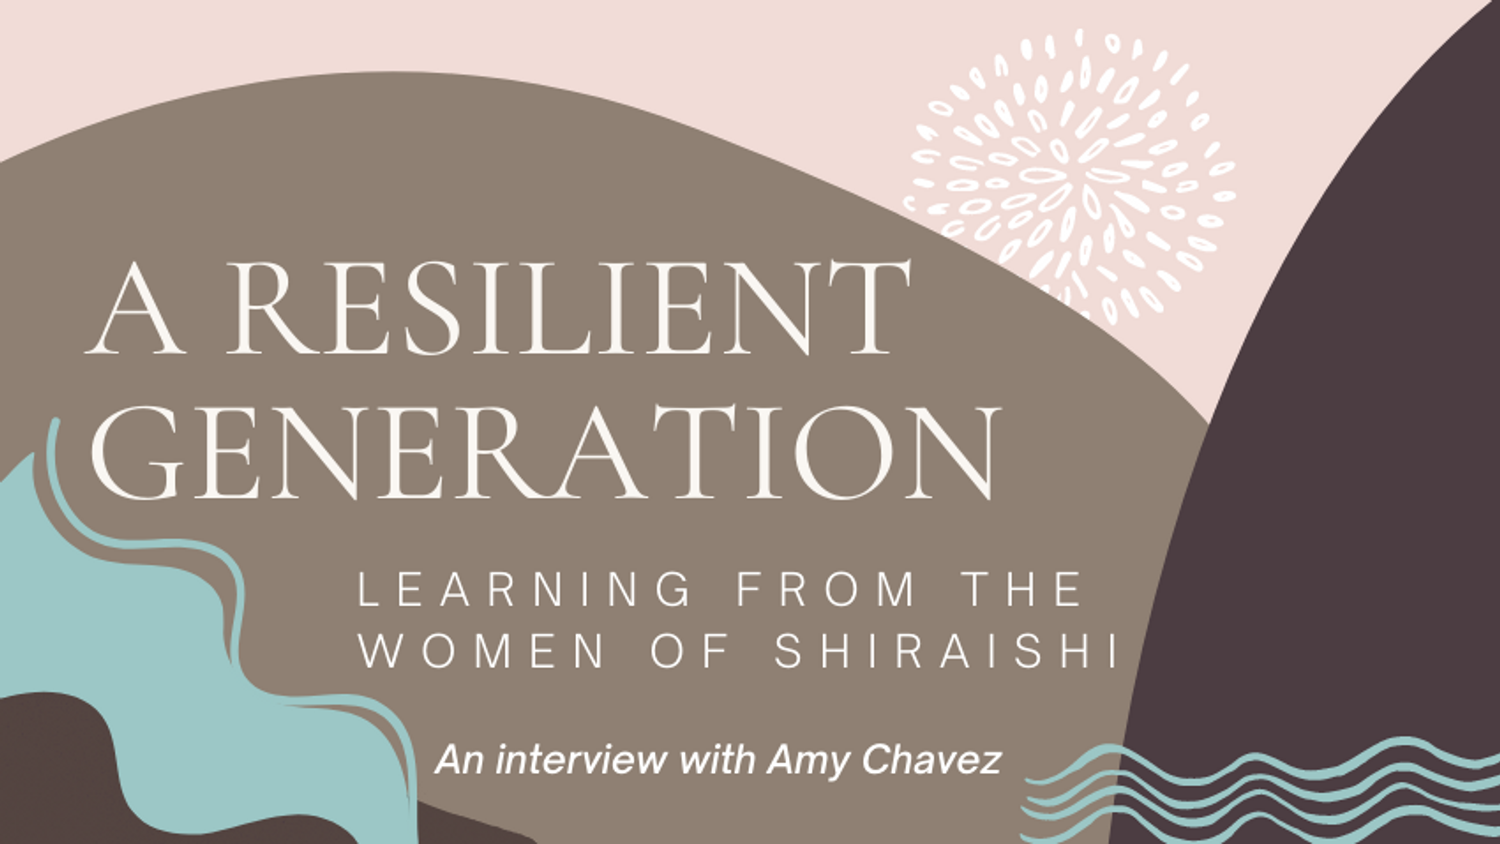 A Resilient Generation: Learning From the Women of Shiraishi